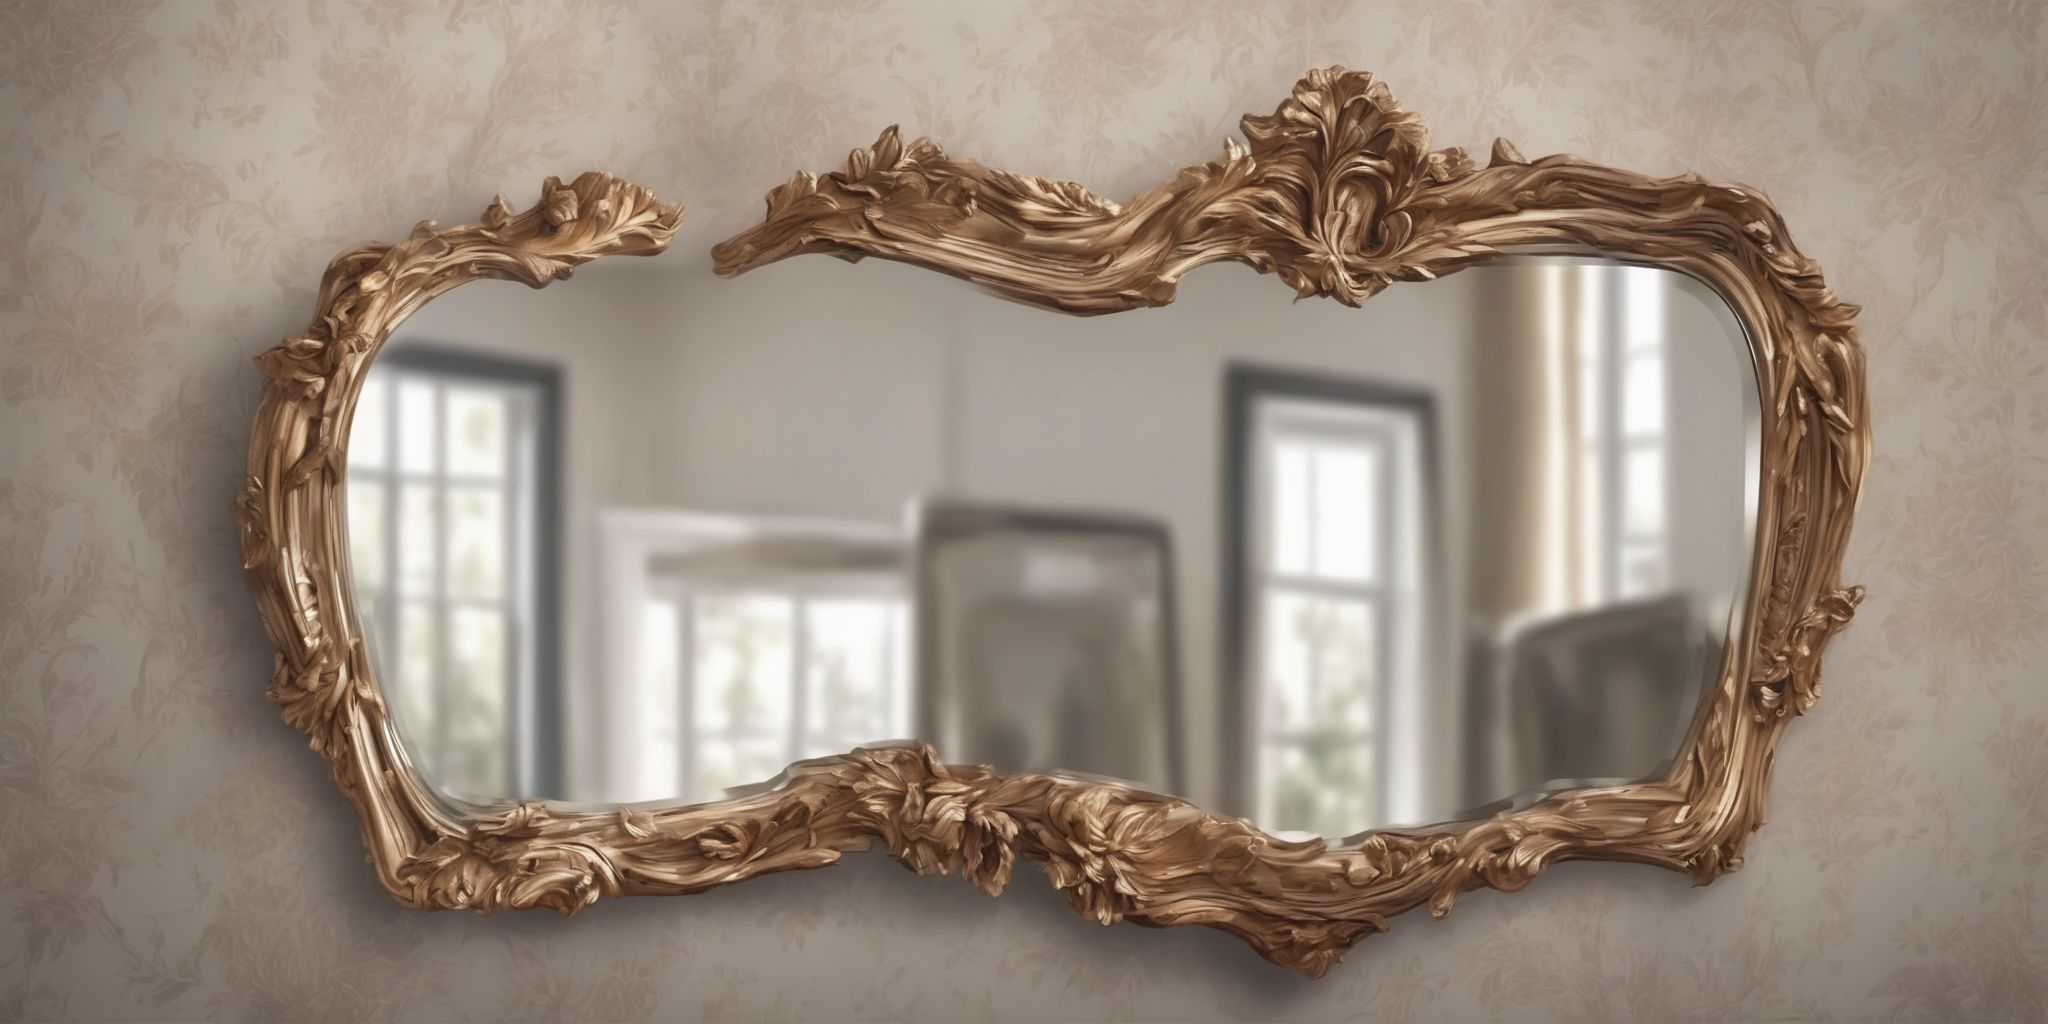 Mirror  in realistic, photographic style